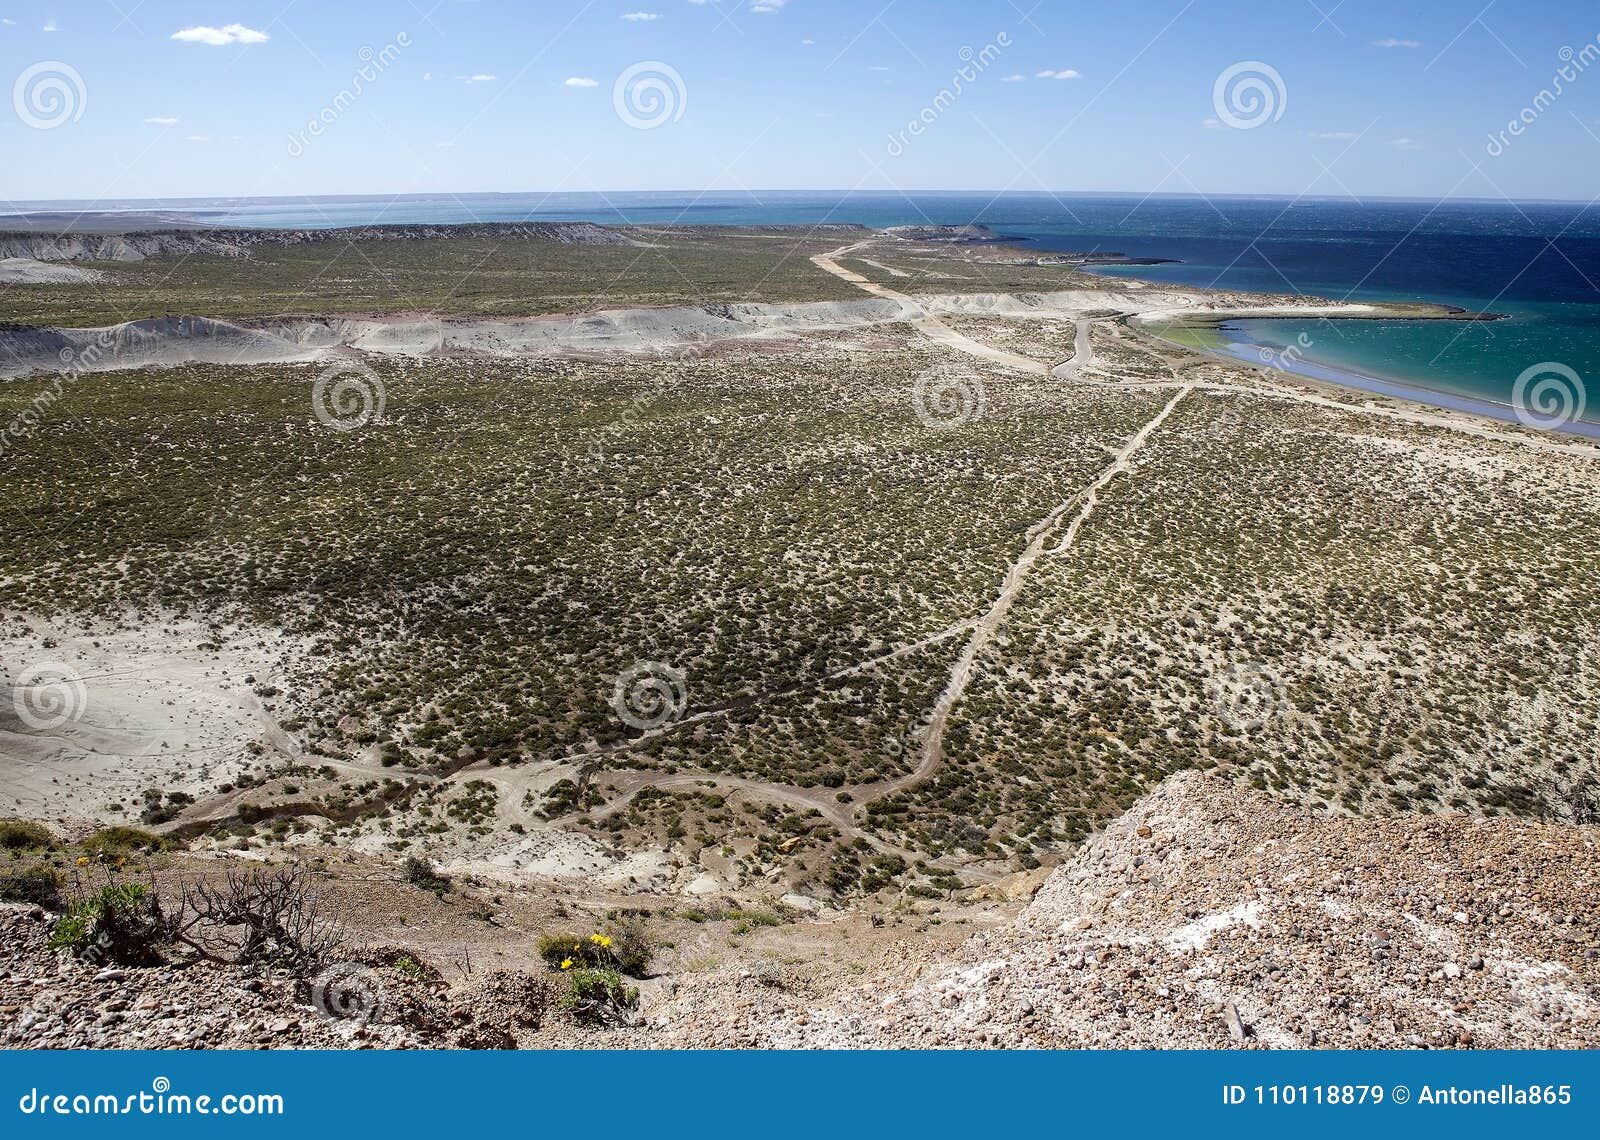 landscape from the hill near puerto madryn, a city in chubut province, patagonia, argentina